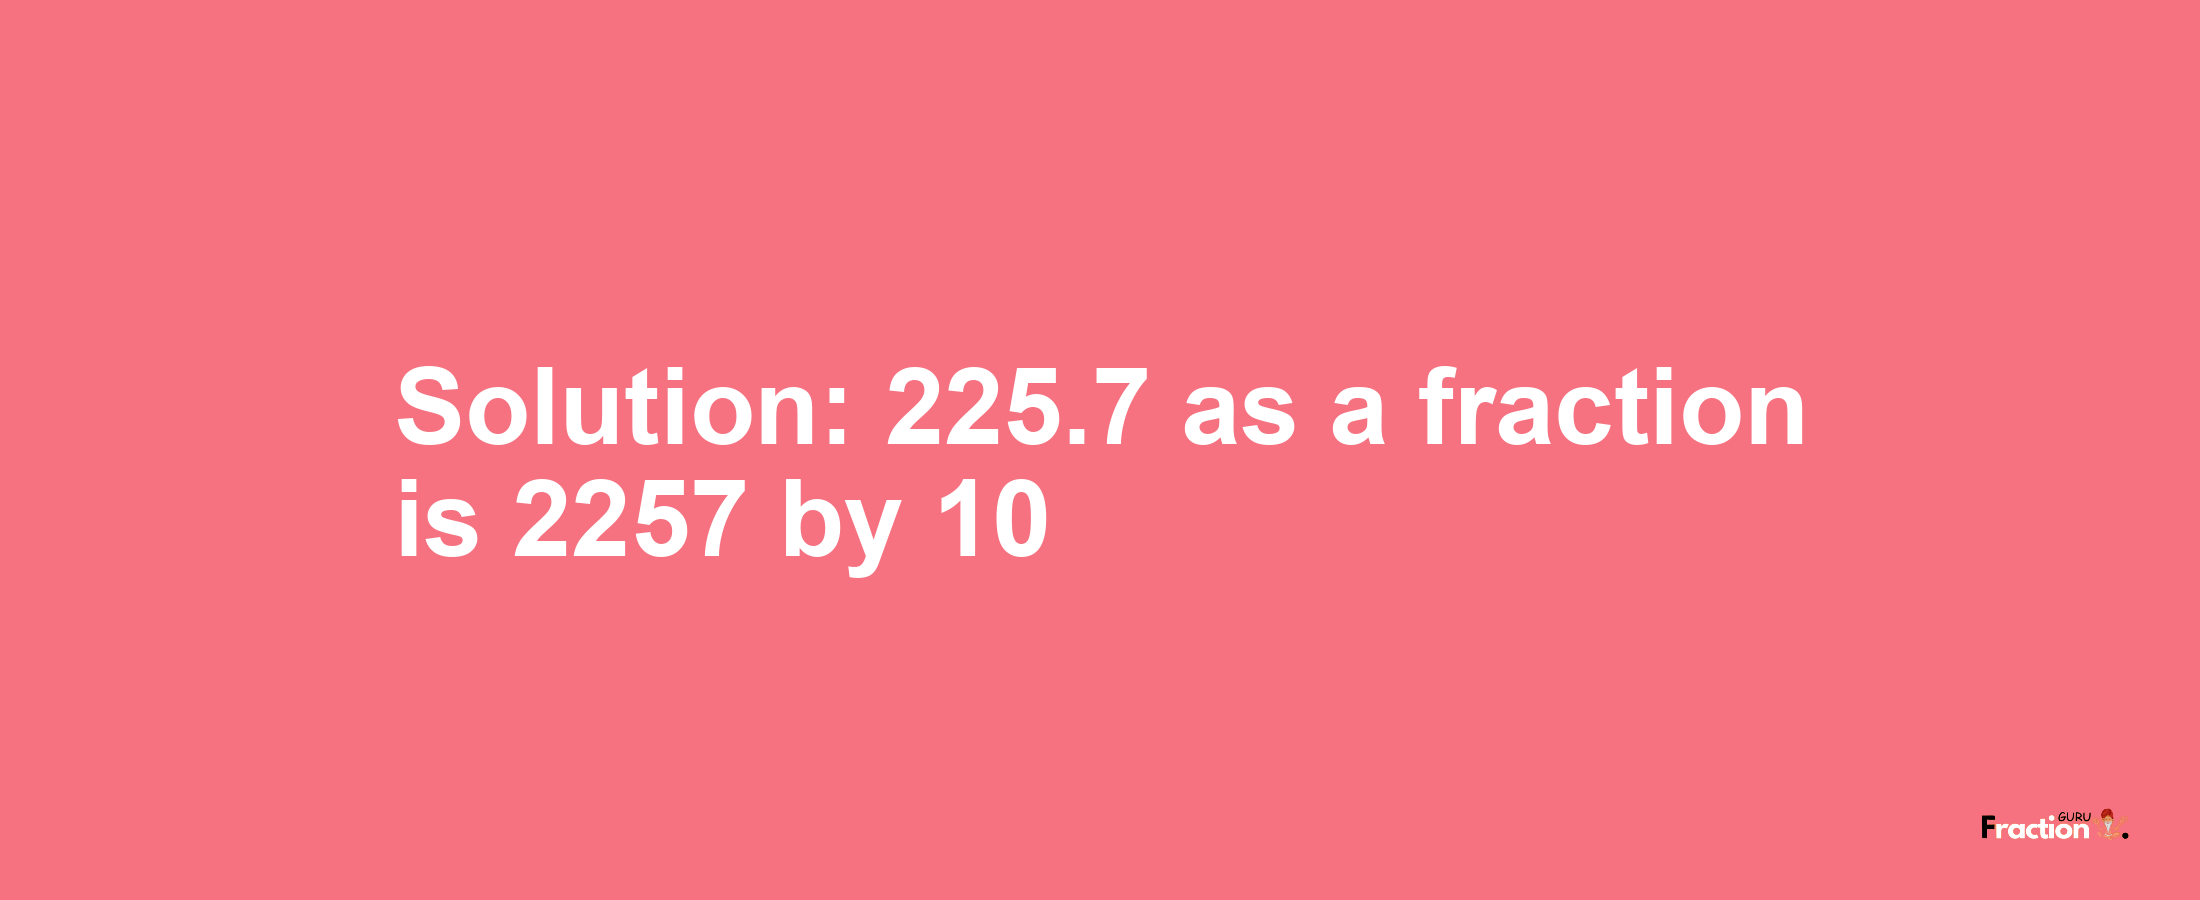 Solution:225.7 as a fraction is 2257/10